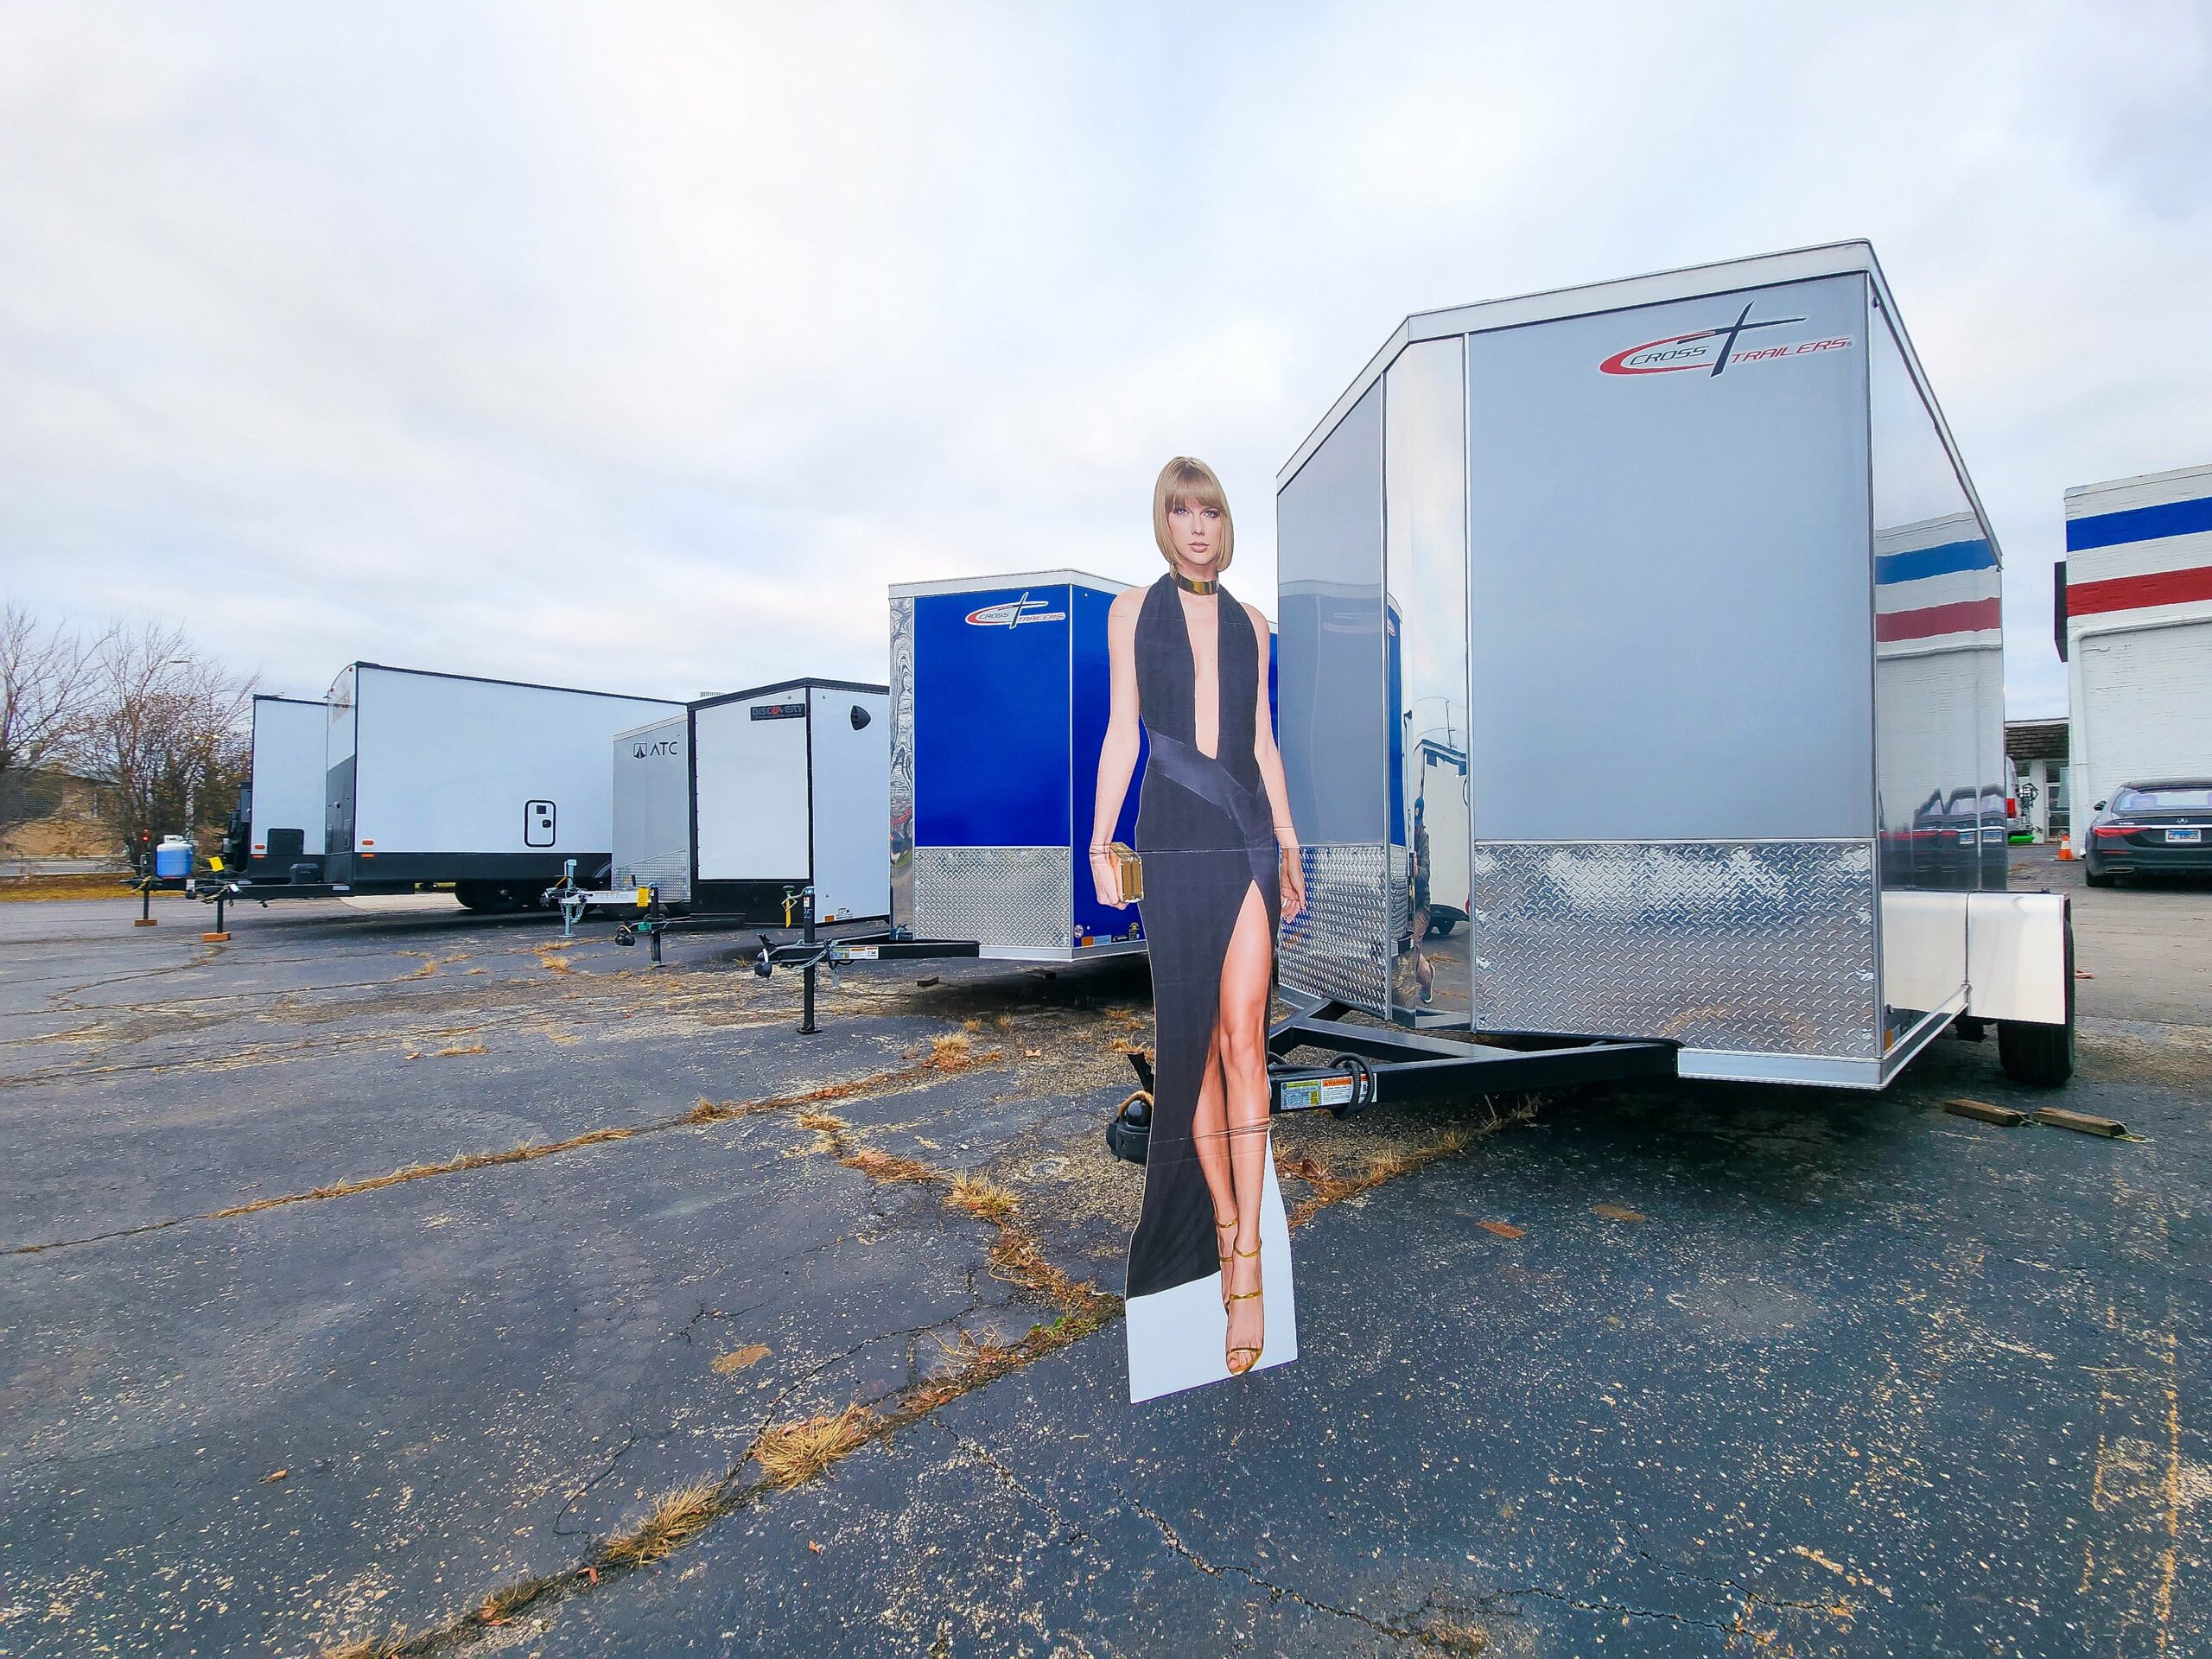 Taylor in a Trailer